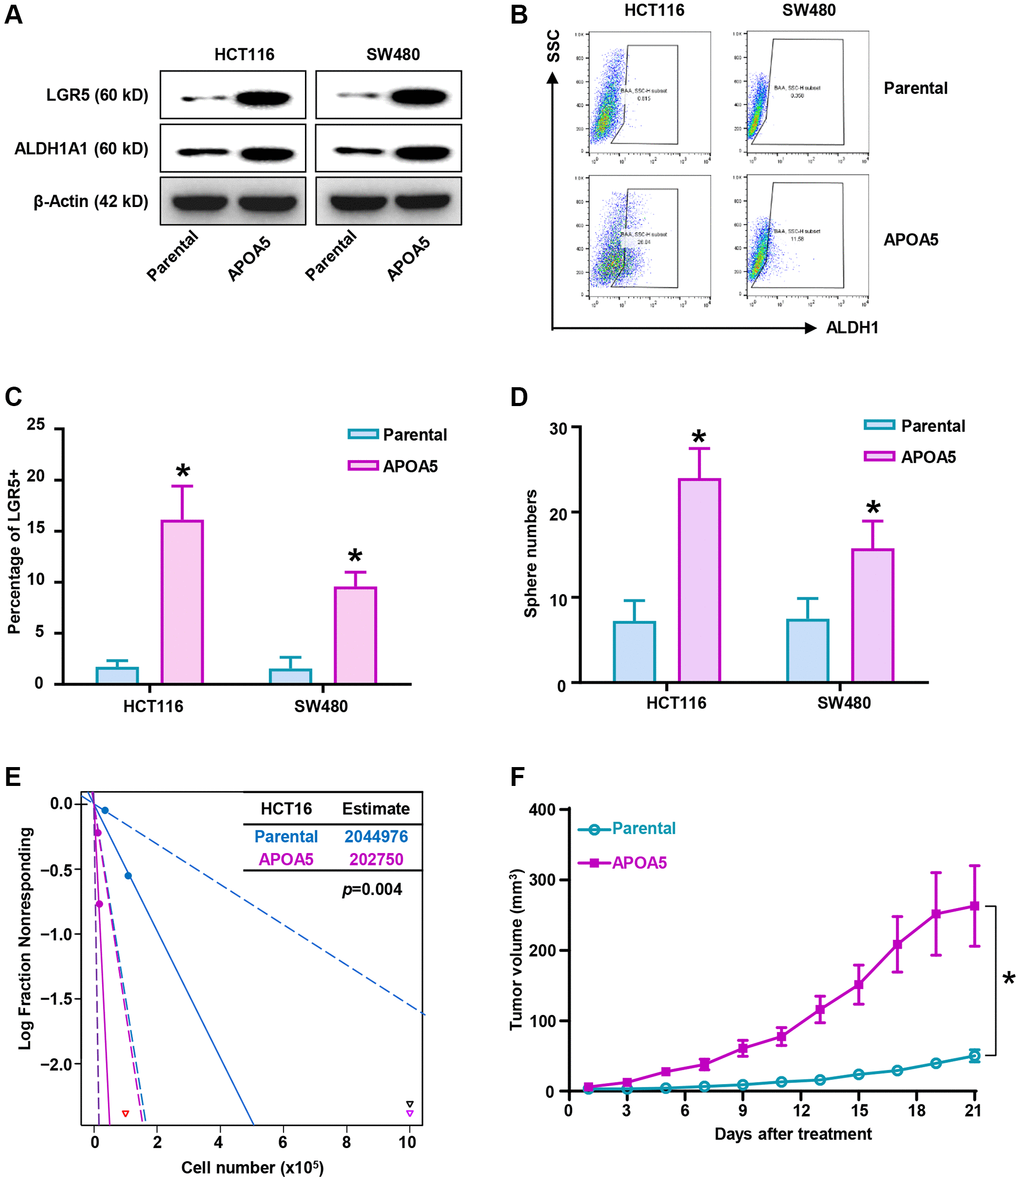 Elevated APOA5 enhances stemness traits of primary CRC cells. (A) Expression levels of stemness-related factors, LGR5 and ALDH1A1 in APOA5 overexpressed and parental primary cells, which was analyzed with Western blot assays. (B) ALDH1high proportion of APOA5 overexpressed and parental cells were determined by flow cytometry analysis. (C) The percentage of LGR5 positive cells in APOA5 overexpressed and parental cells were analyzed with flow cytometry analysis. Data are shown as the mean +/− SEM. (D) Tumorosphere formation efficiency was compared between APOA5 overexpressed and parental cells. Results are representative of at least three independent experiments. (E) Tumorigenesis ability of HCT116-APOA5 and parental cells was analyzed with subcutaneous xenografts by gradient number of cancer cells in vivo. (F) Growth curves of tumors (1 × 106 cells injected) showed increased tumor growth of HCT116/APOA5 than control cells (n = 6 each group). p-values *.